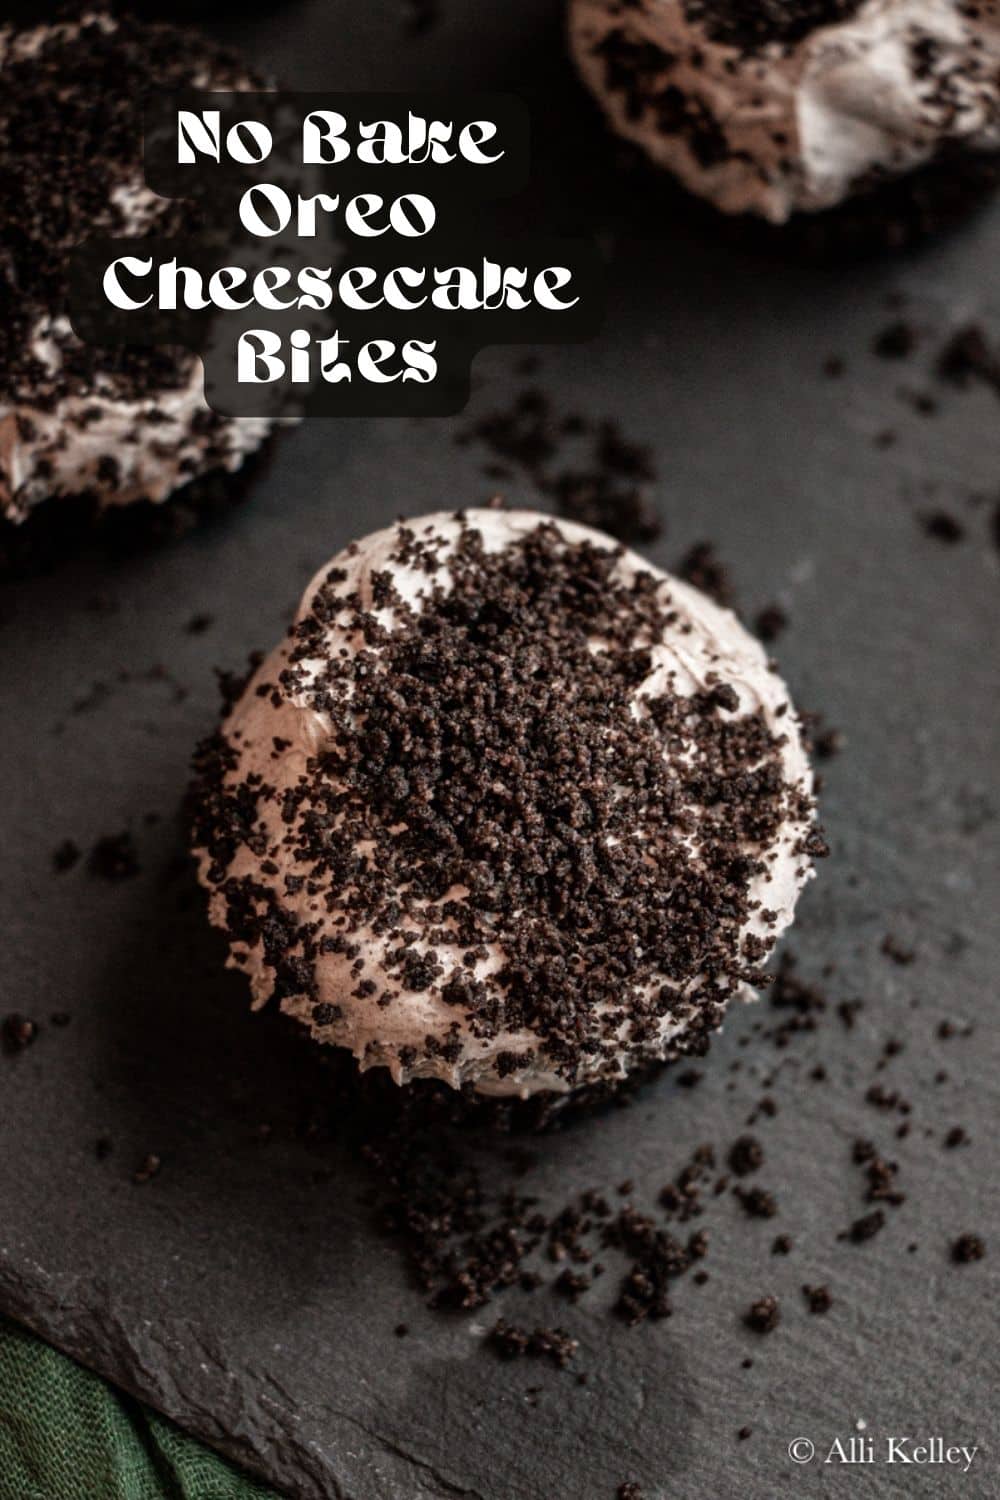 If you love delicious desserts, then you will definitely want to try these no bake cheesecake bites! The combination of Oreo cookies and creamy vanilla cheesecake is such a treat for your tastebuds. With just a few simple ingredients and basic kitchen tools, these no bake oreo cheesecake bites can be whipped up in no time at all!